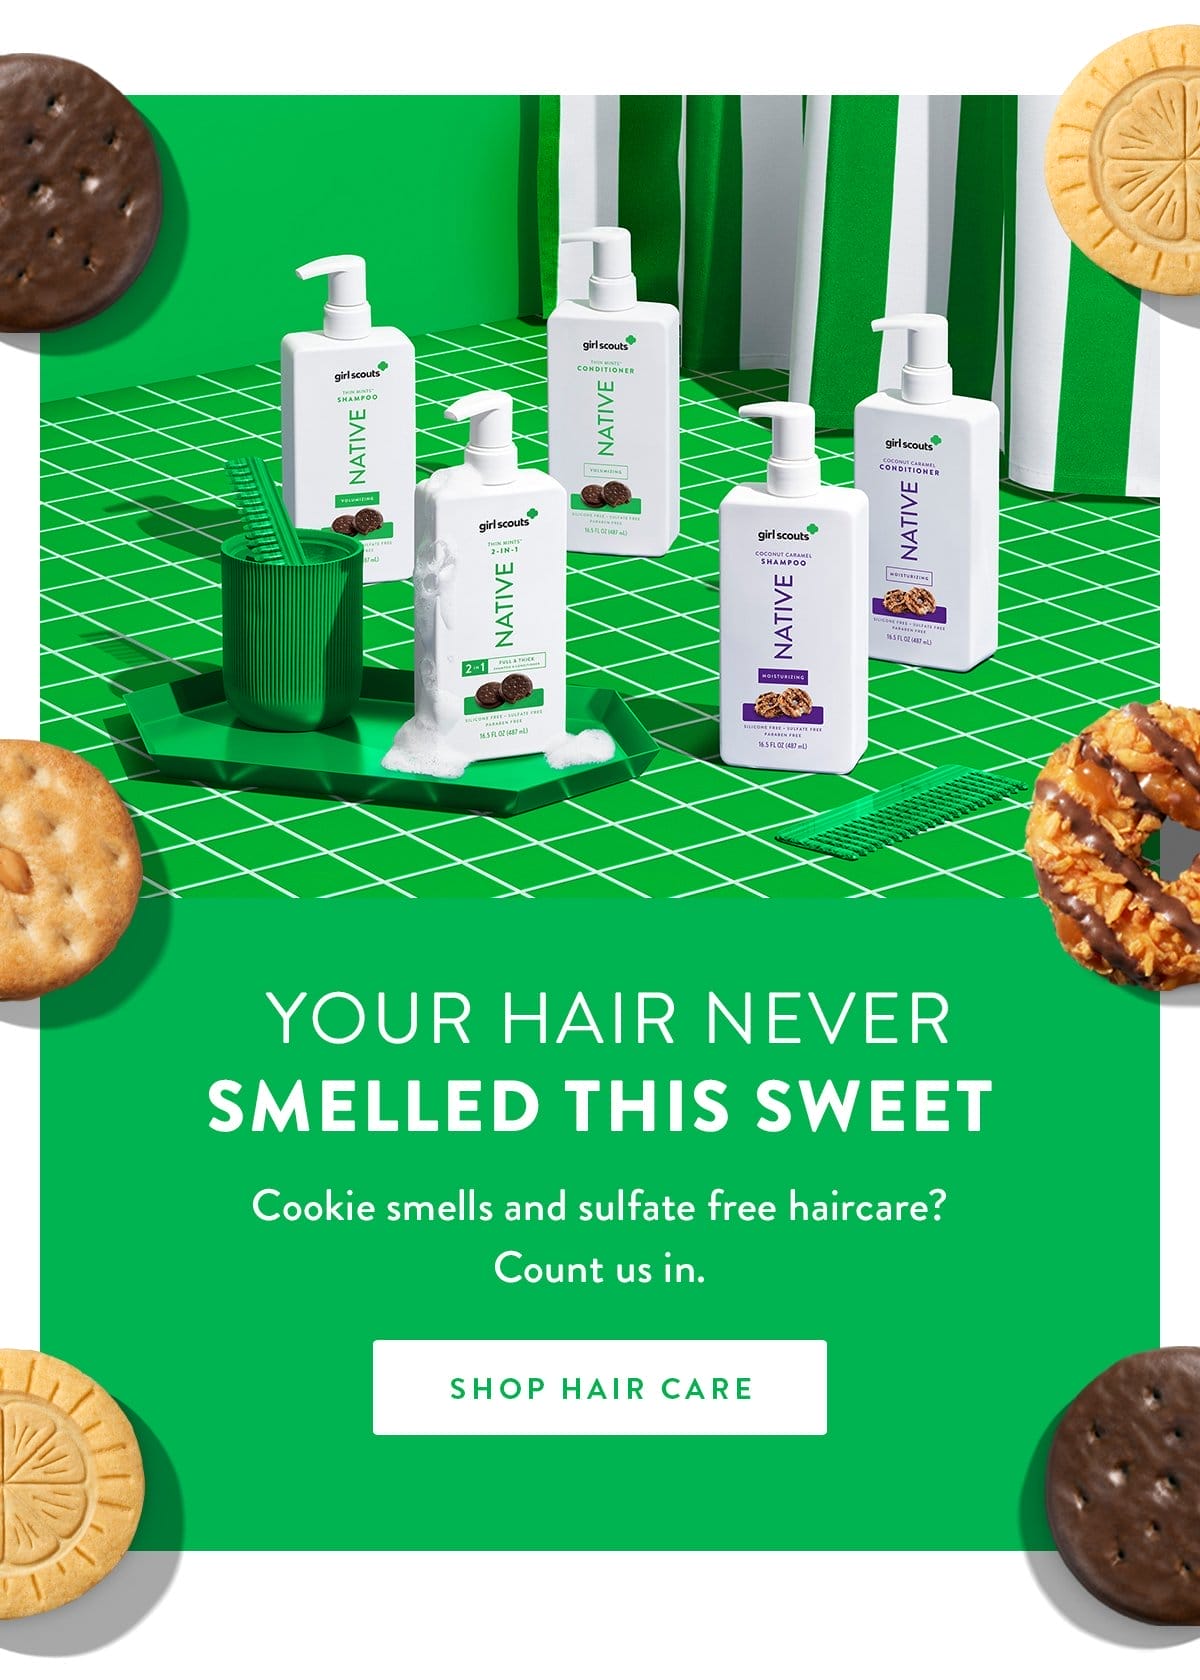 Your Hair Never Smelled This Sweet | Cookie smells and sulfate free haircare? Count us in. | SHOP HAIR CARE